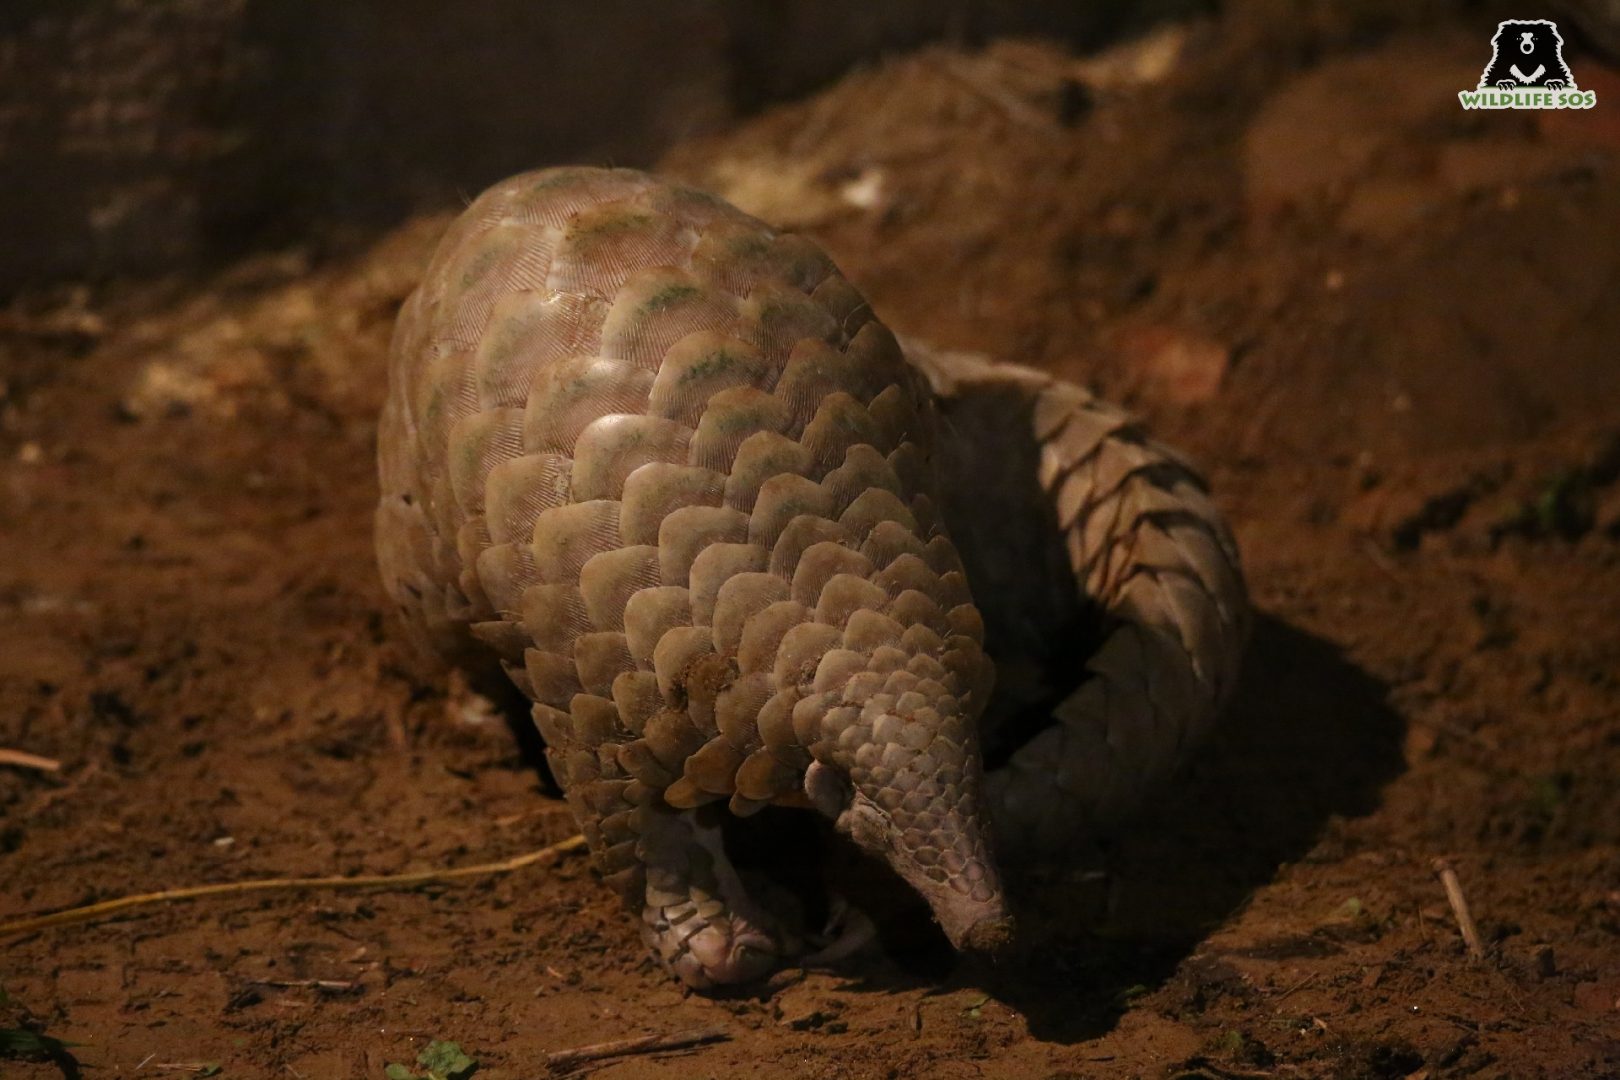 Pangolins are often extracted from burrows by setting traps or smoking out